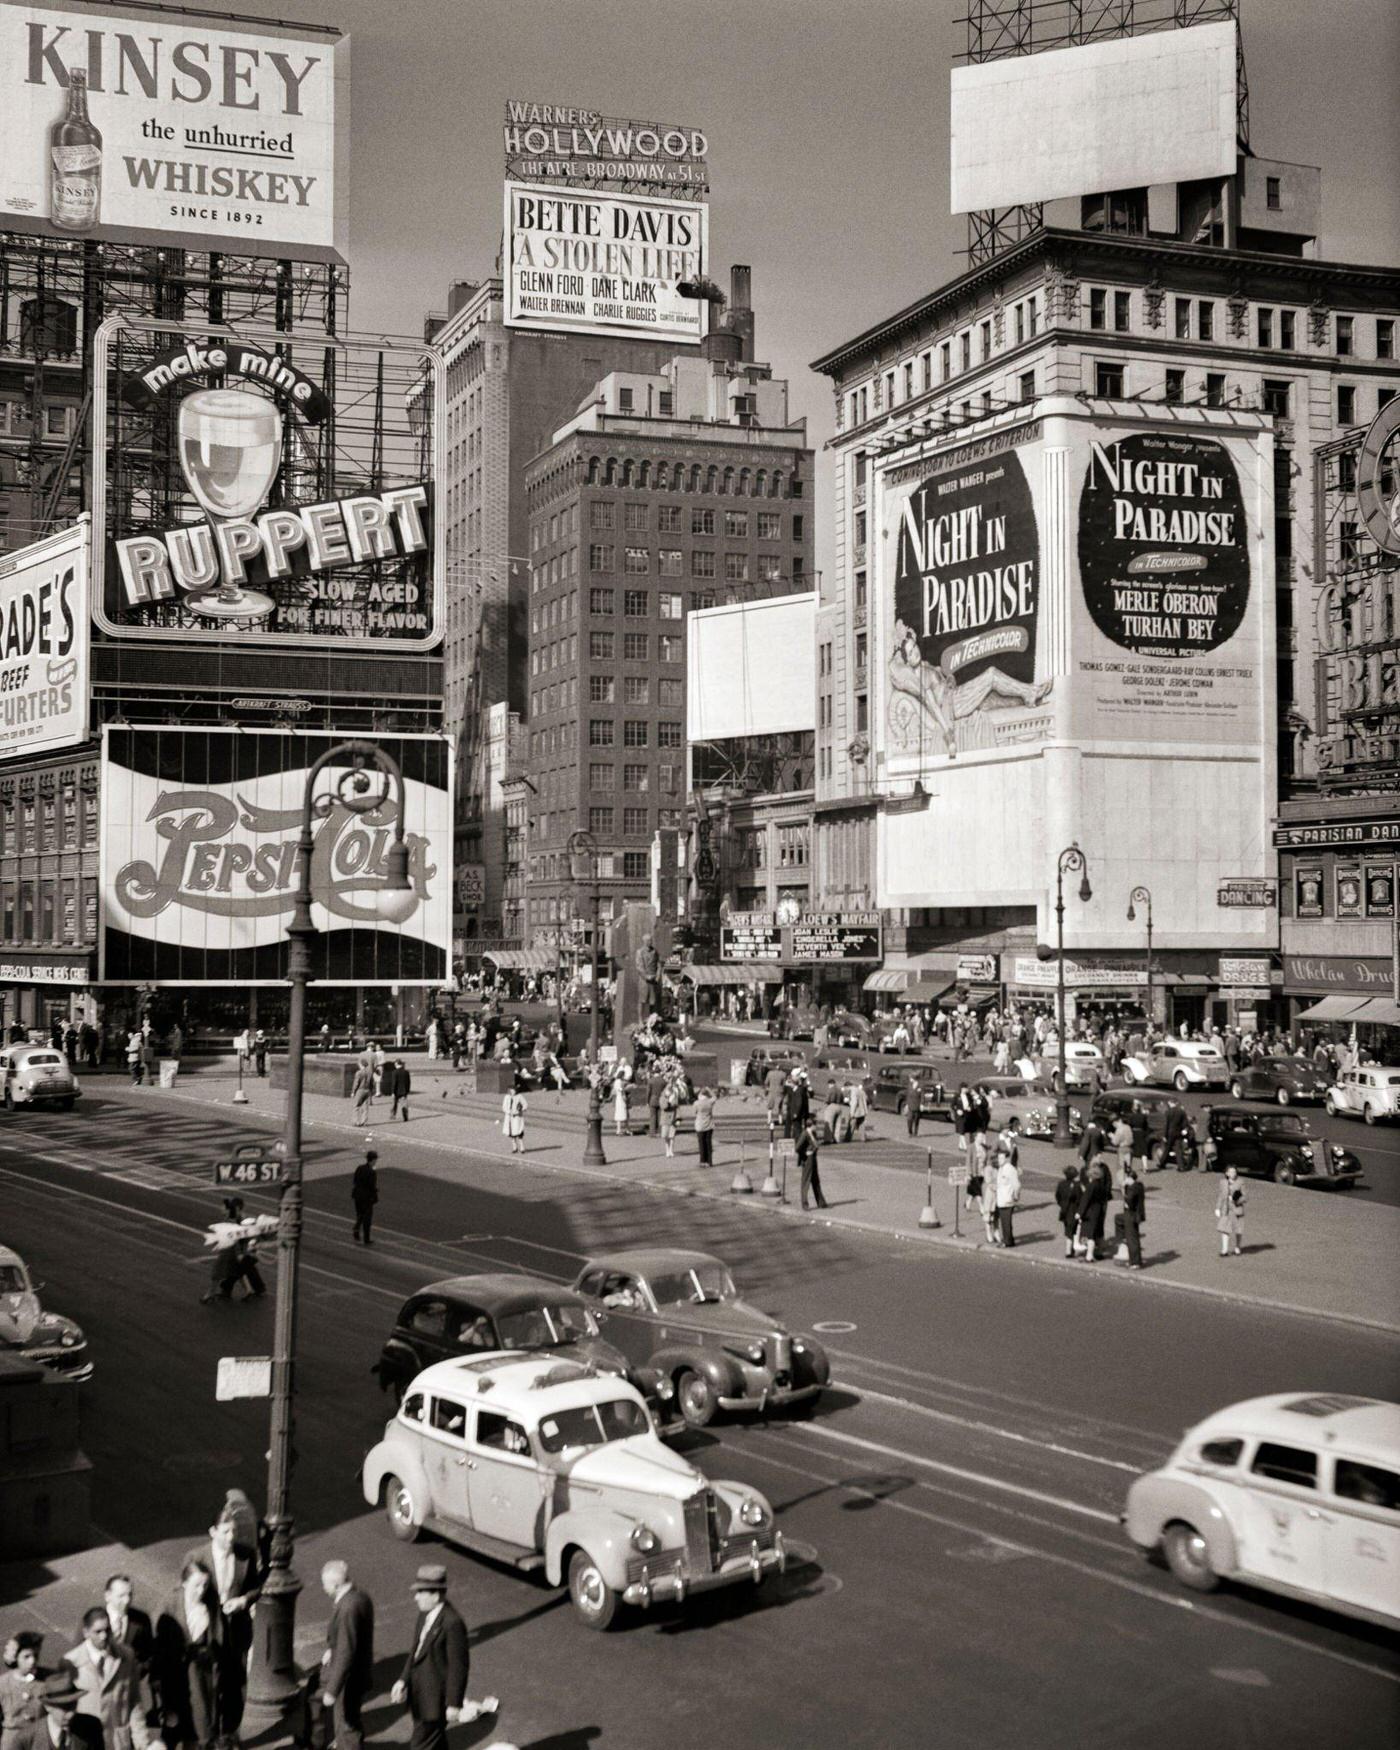 Duffy Square, Part Of Times Square With Gaudy Signs, Pedestrians, Cars, Taxis, Manhattan, 1940S